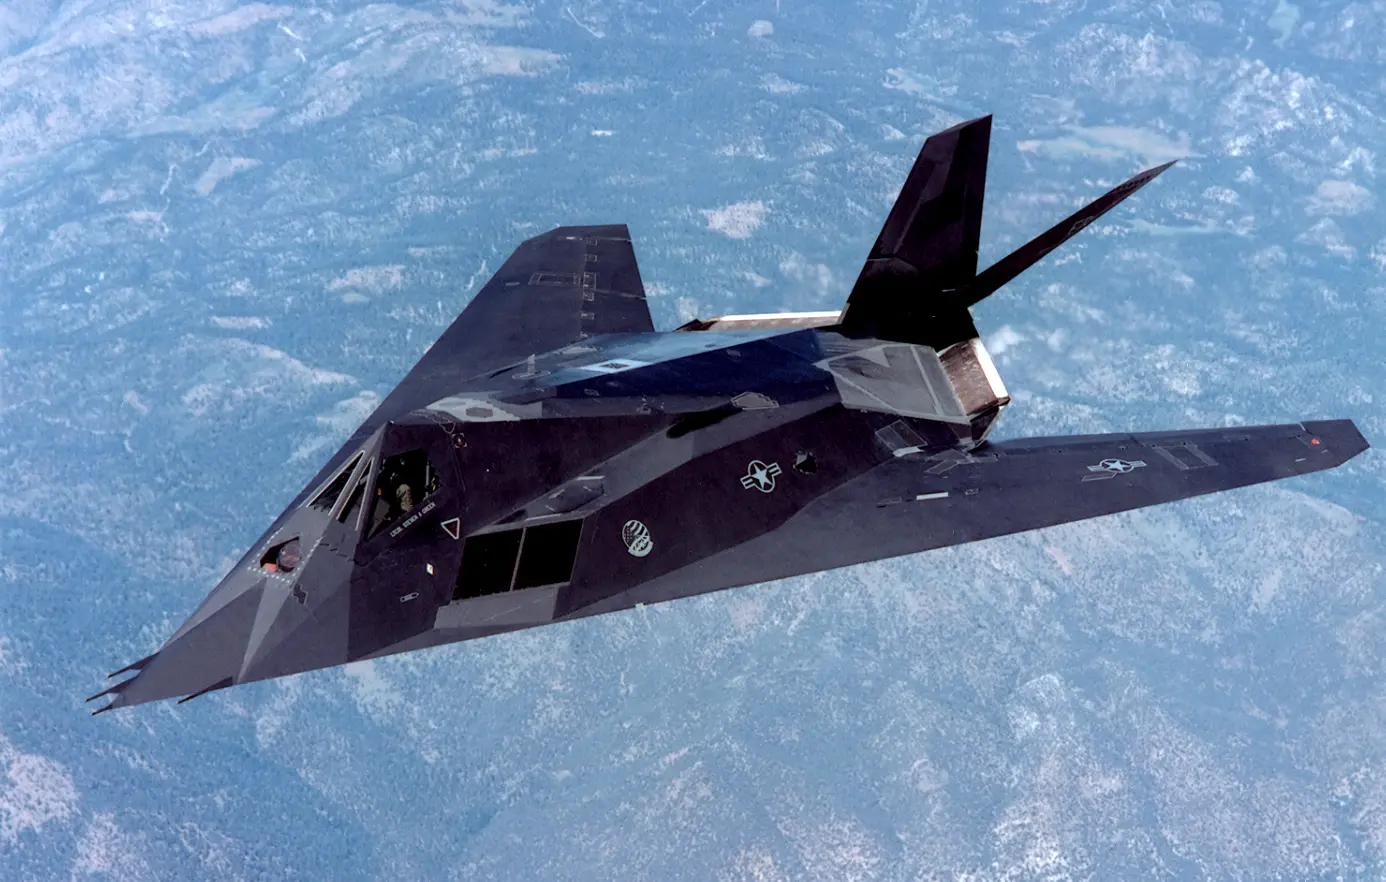 The F-117 first flew on 18 June 1981. It retired in 2008.